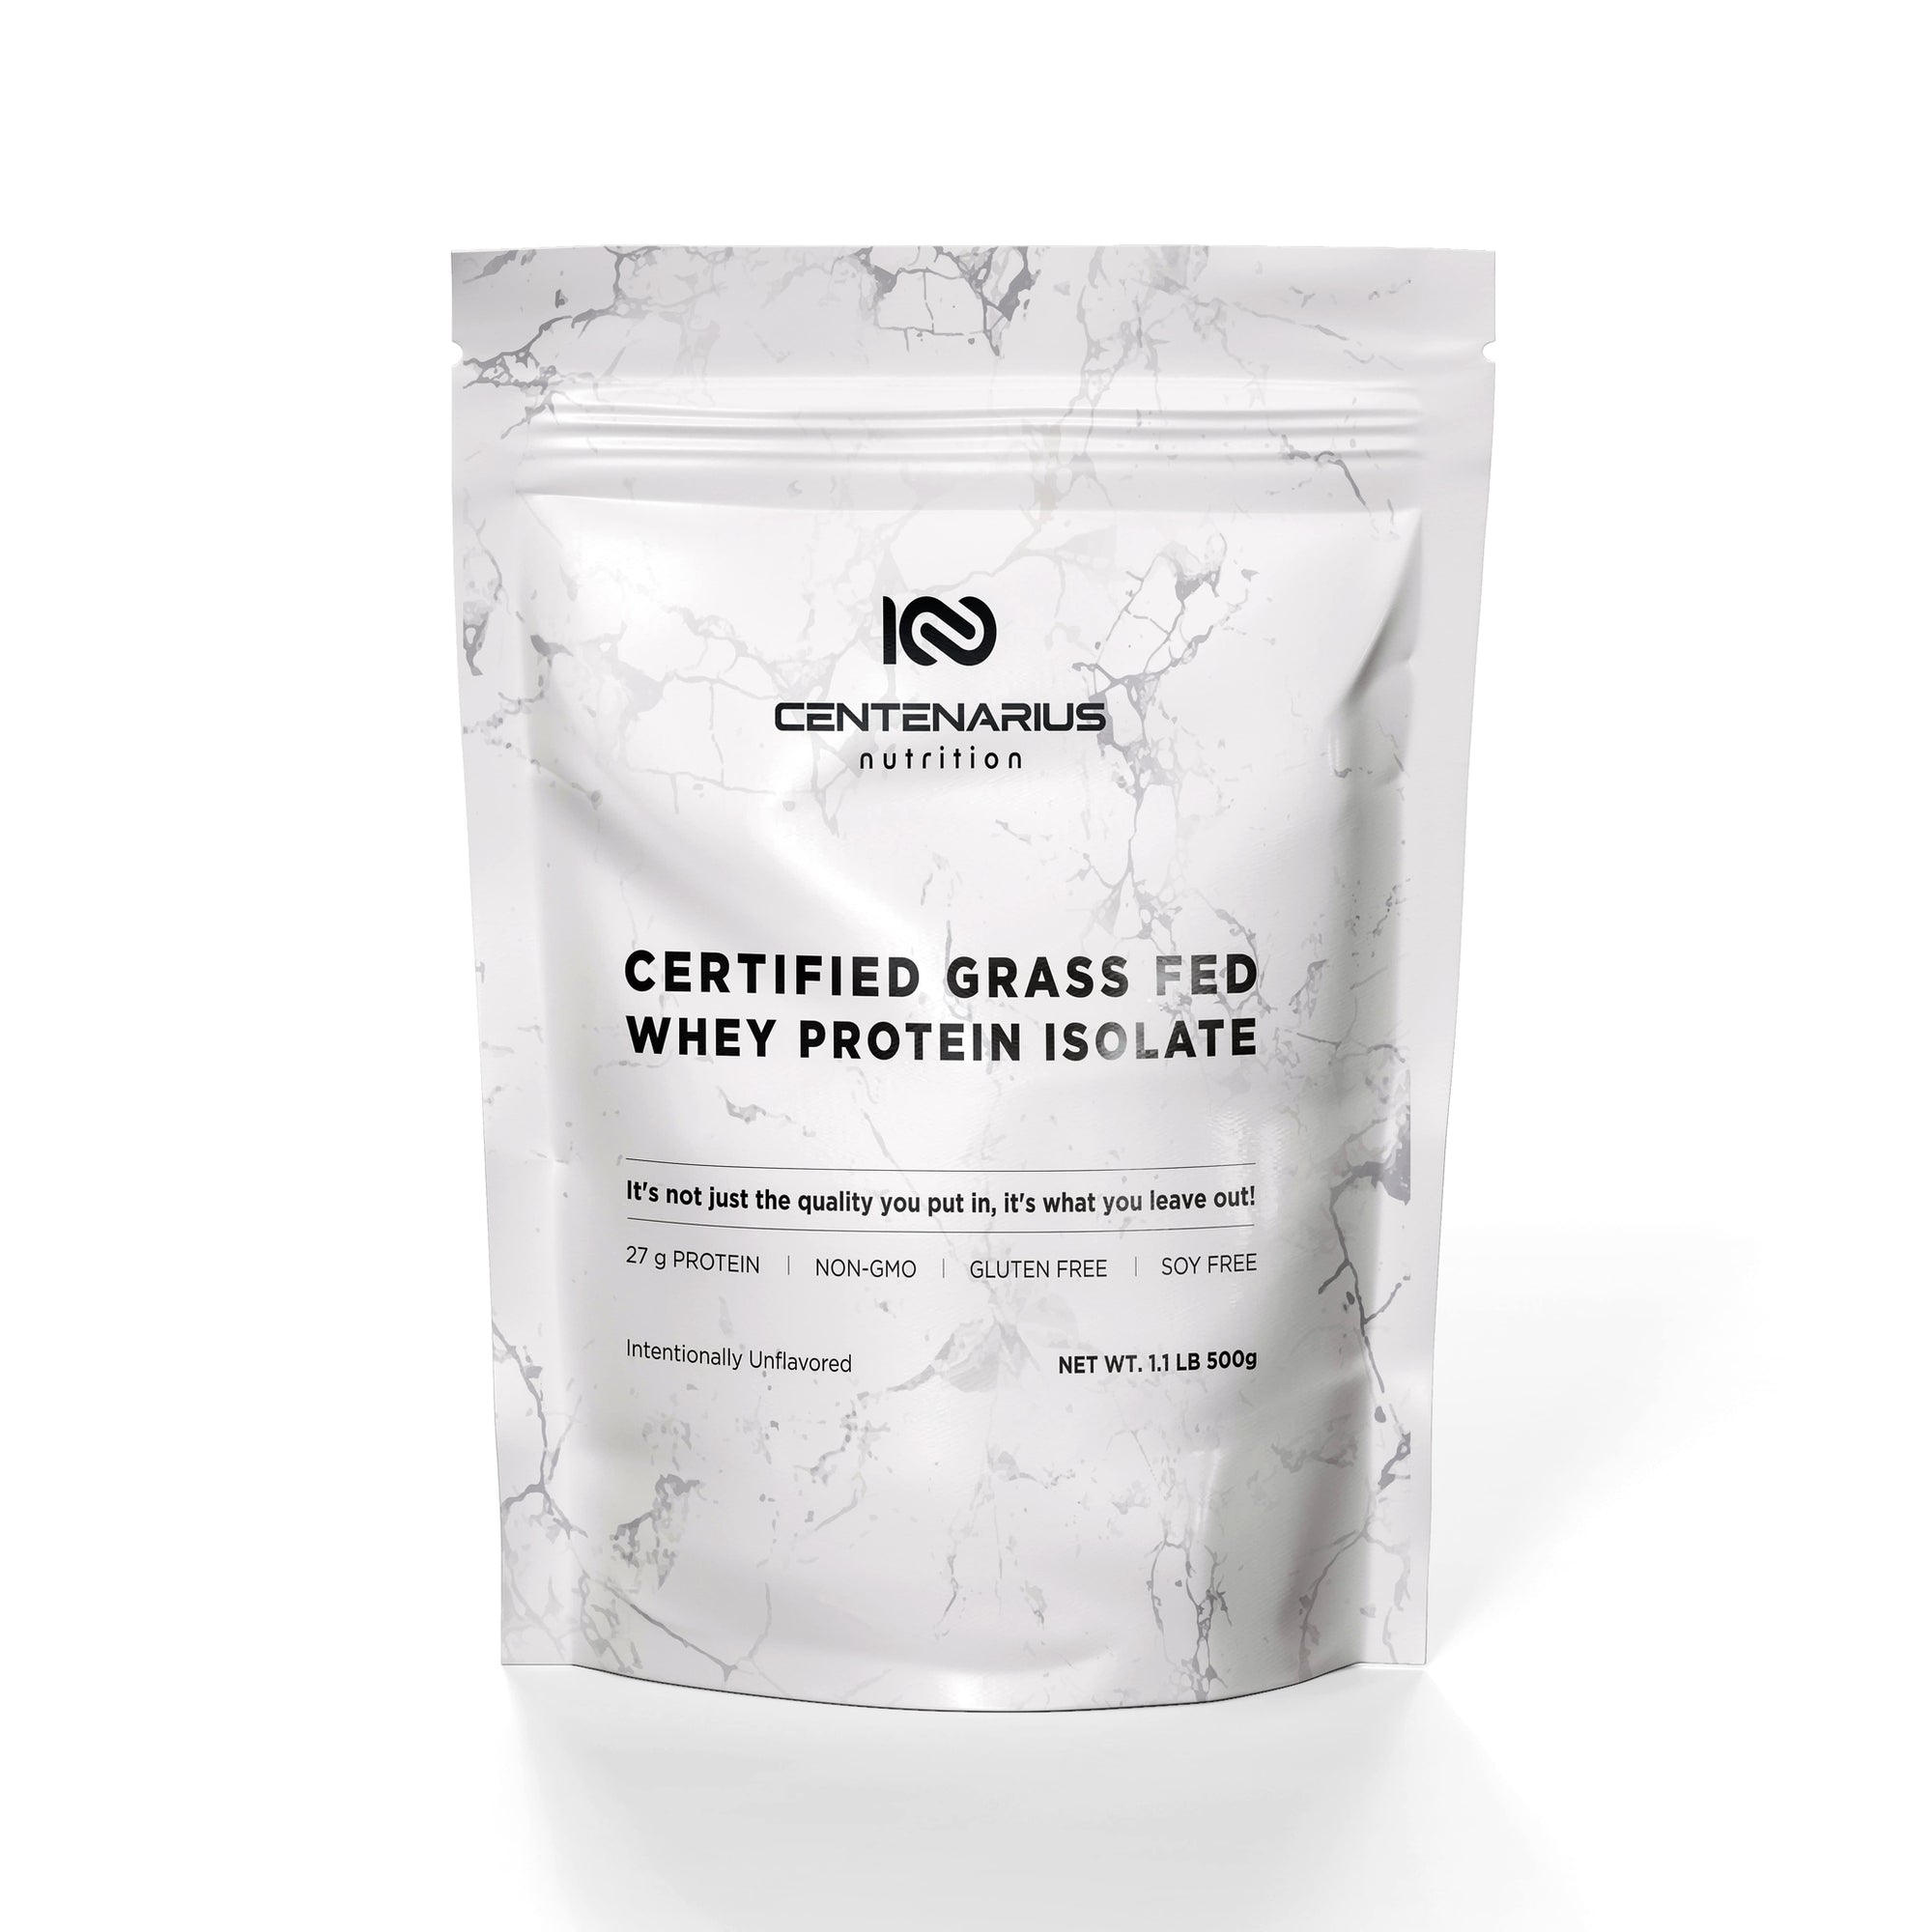 Certified Grass-fed Whey Protein Isolate